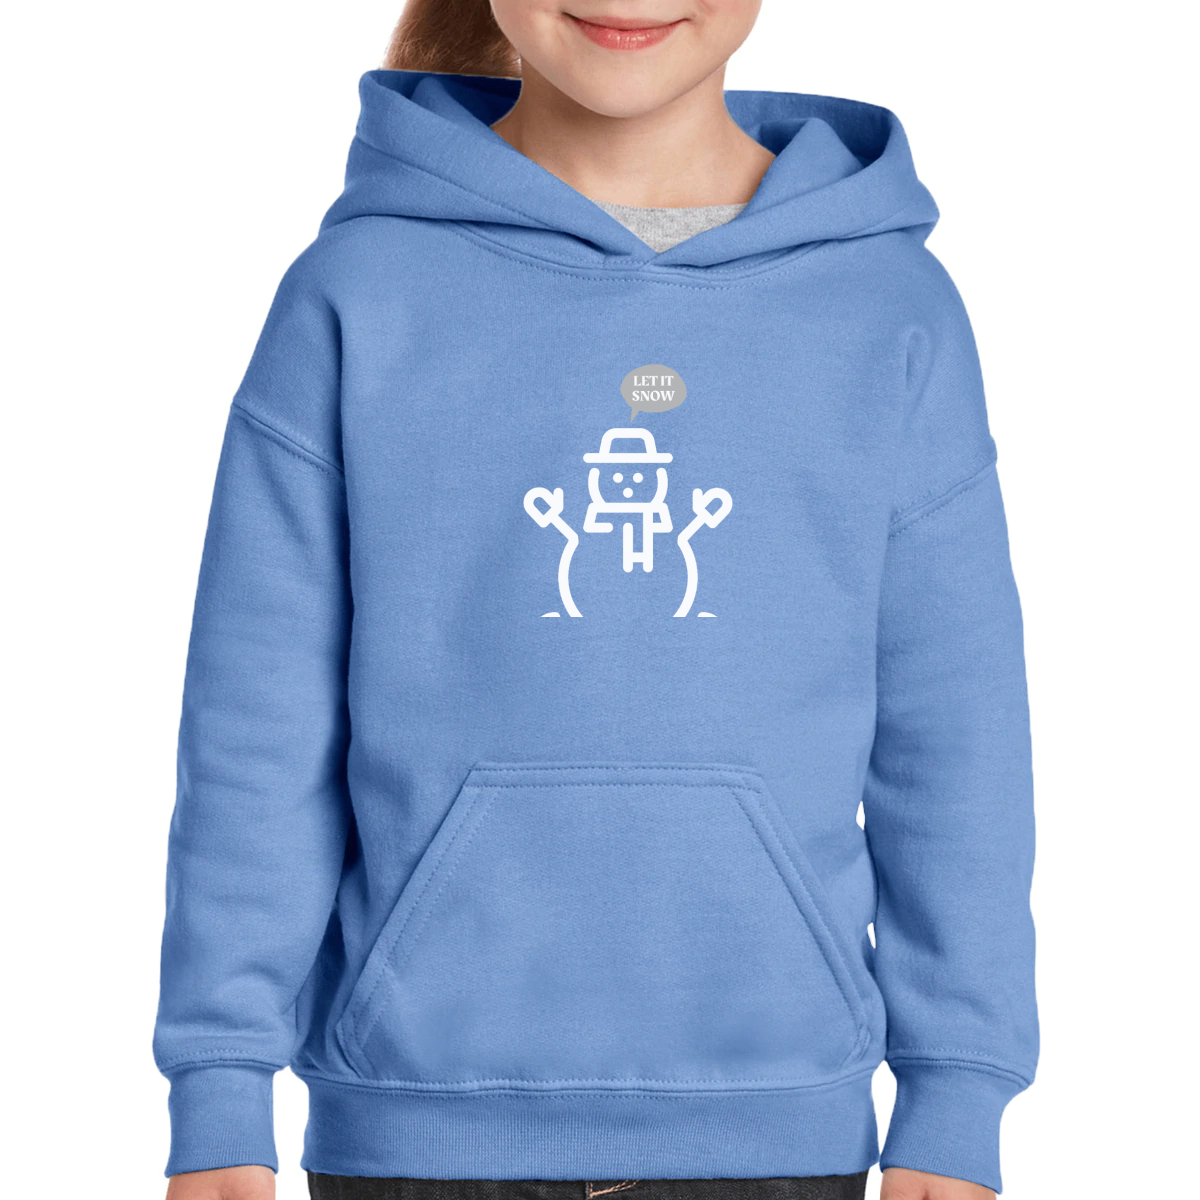 Let It Snow and Give Me a Cold Hug Kids Hoodie | Blue